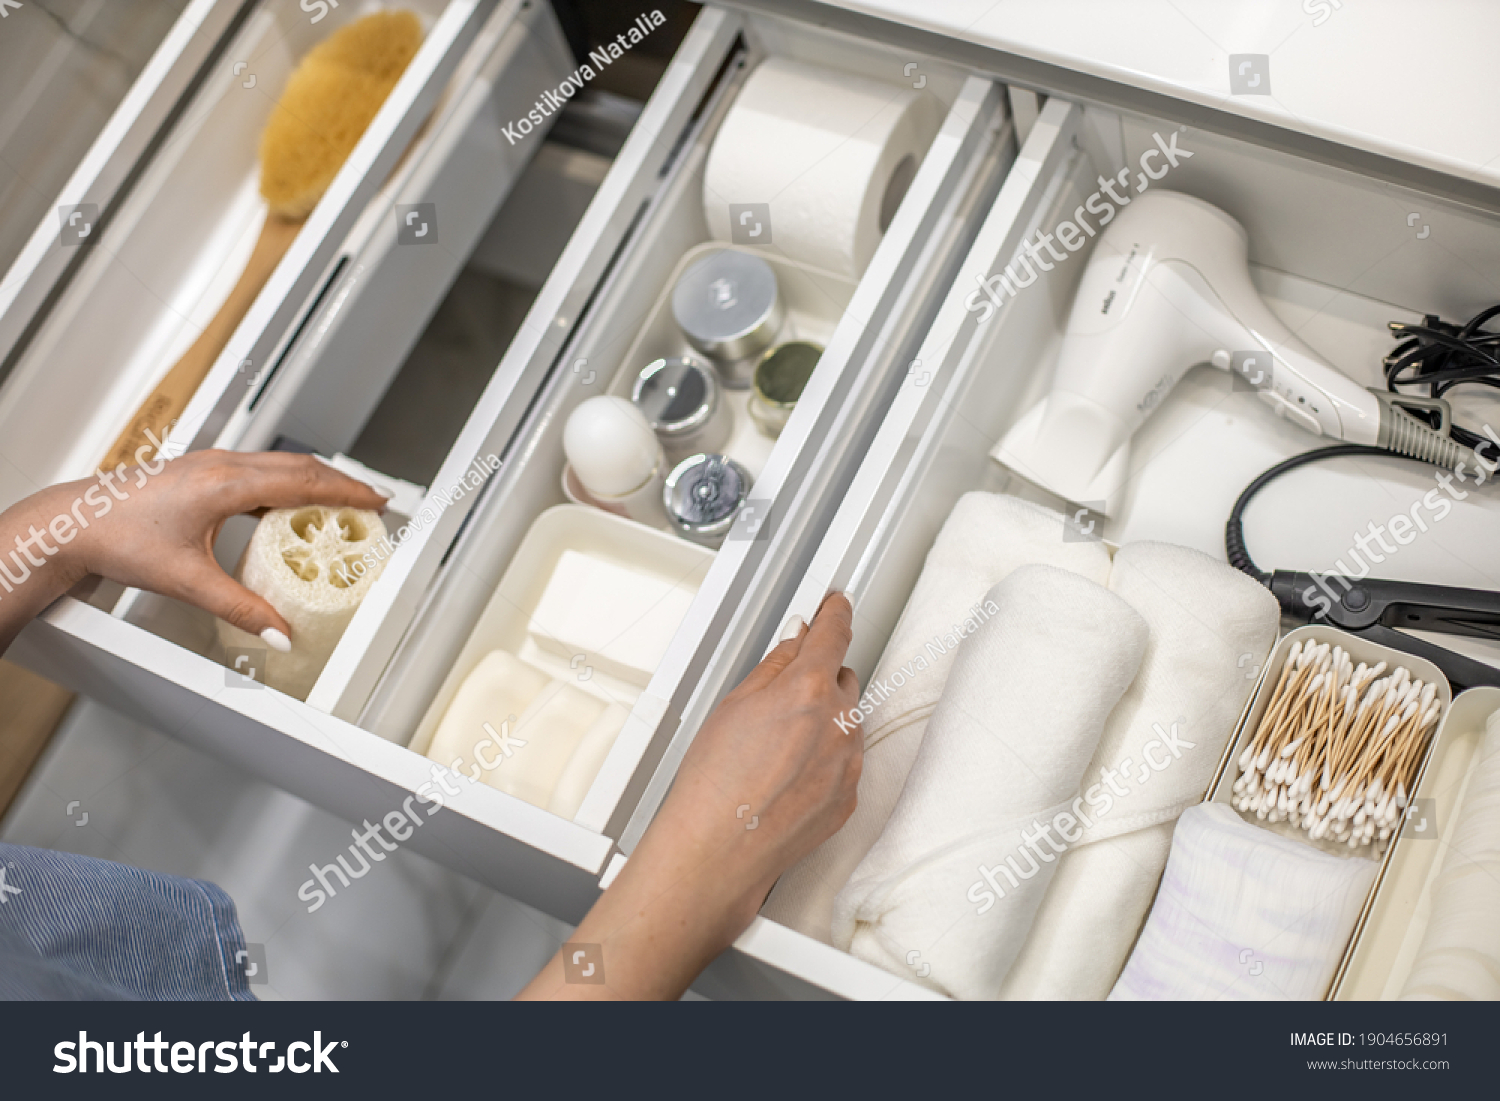 Top view of woman hands neatly organizing bathroom amenities and toiletries in drawer or cupboard in bathroom. Concept of tidying up a bathroom storage by using Marie Kondo's method. #1904656891